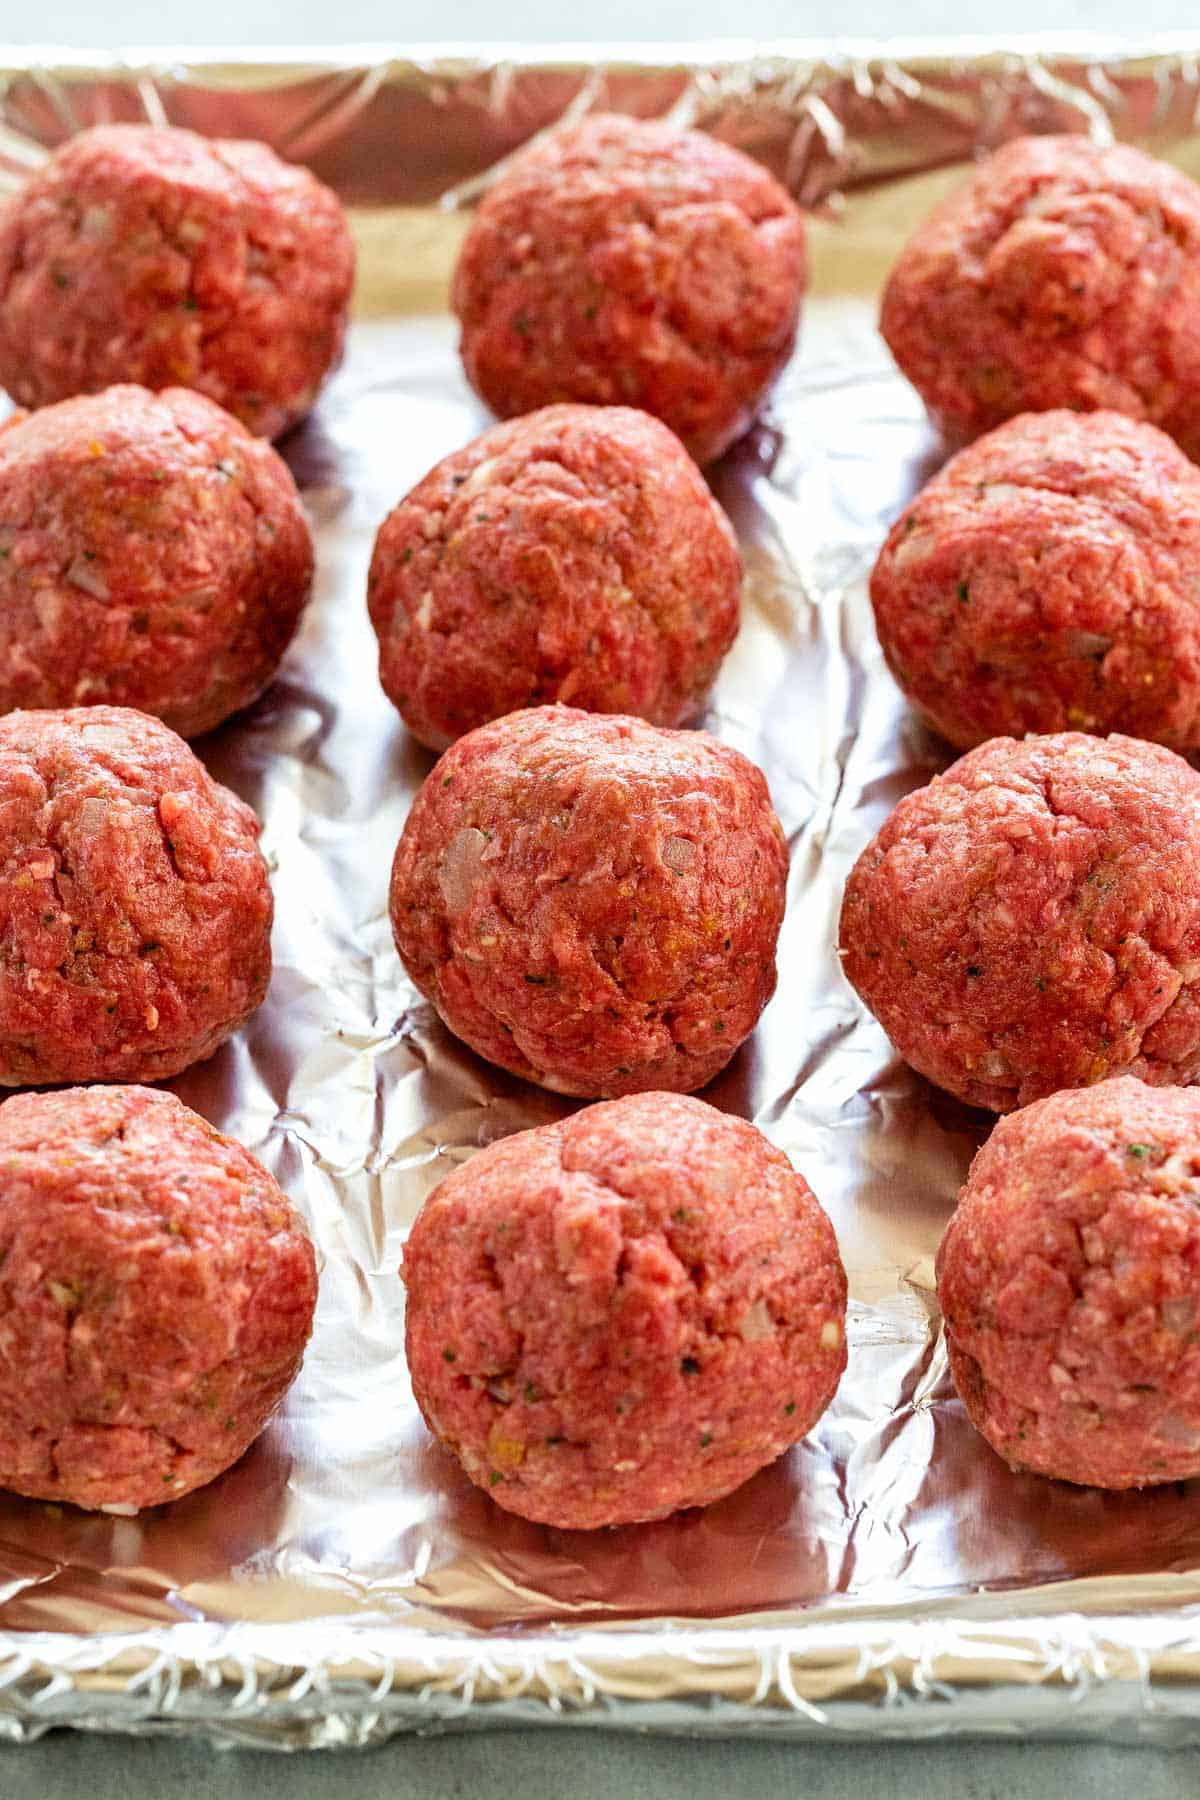 Top 15 Types Of Ground Beef